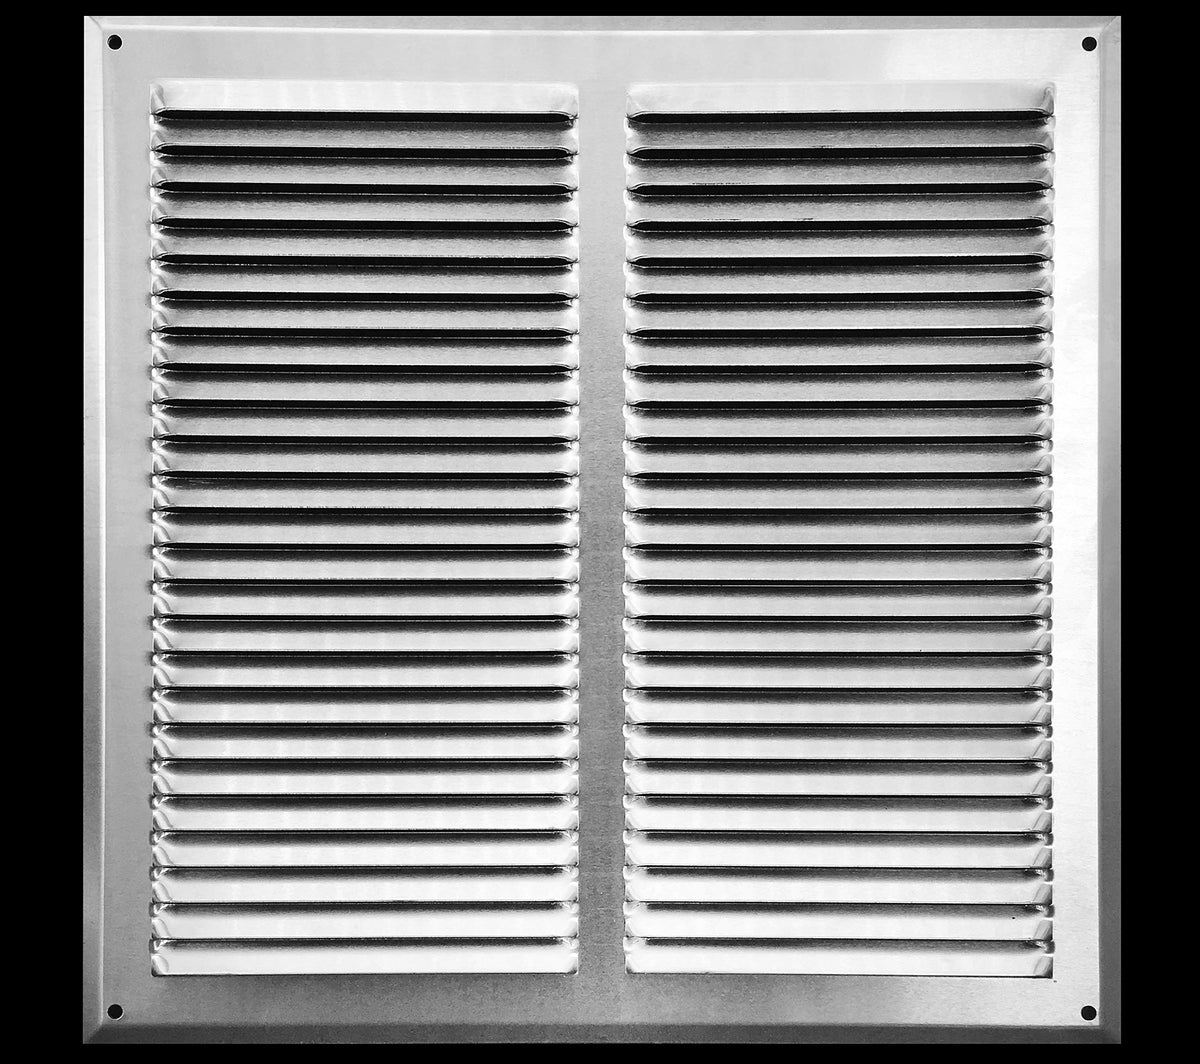 10&quot; X 10&quot; Outdoor Return Air Grille – For Outdoor Use - HVAC Vent Duct Cover Diffuser – [1.0mm Polished Aluminum] [Outer Dimensions: 11.75w X 11.75h]